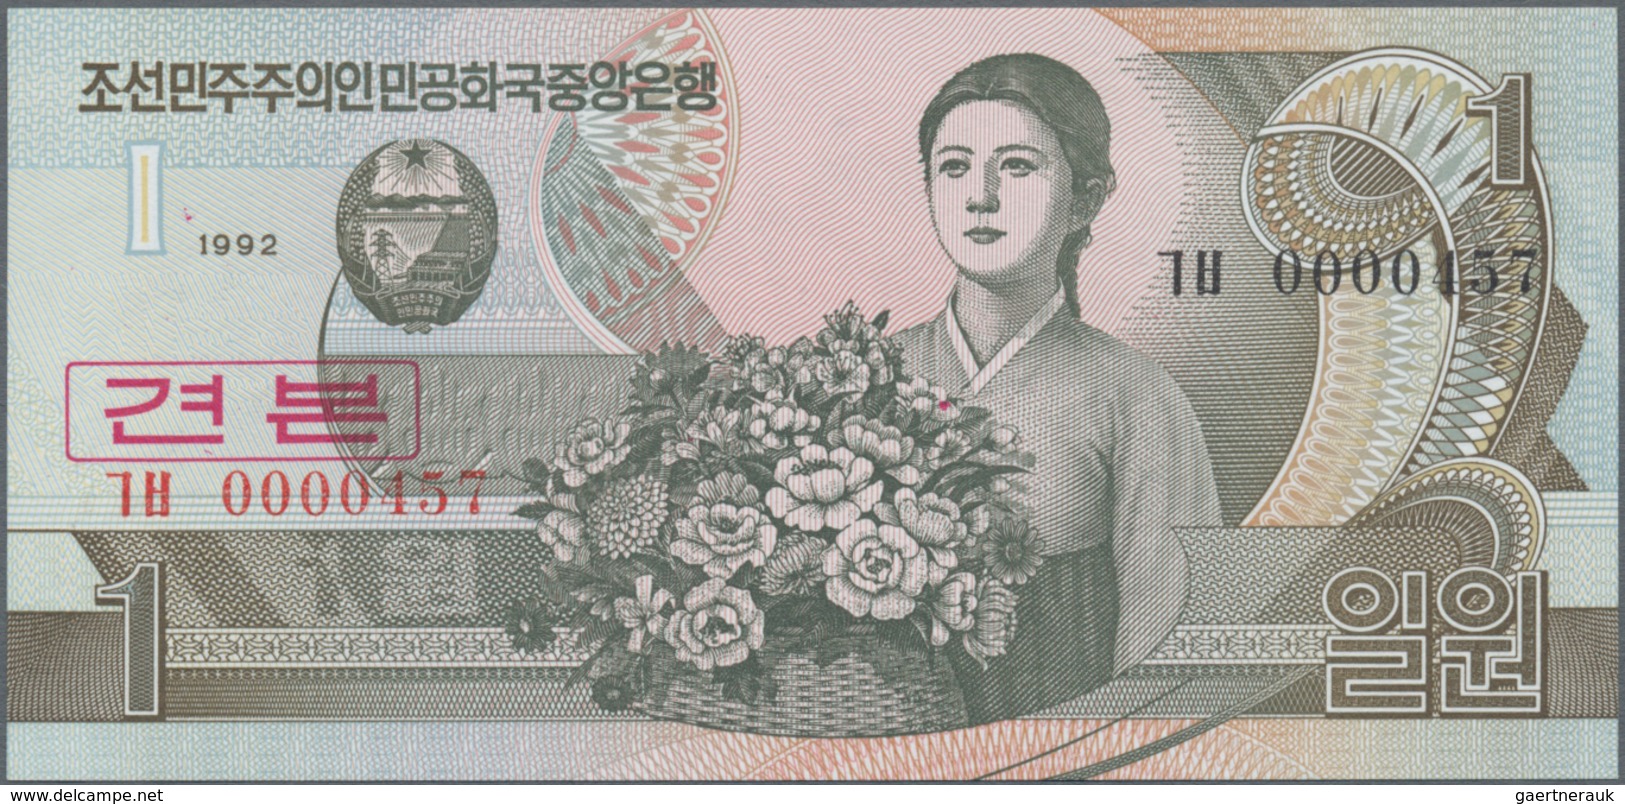 Korea: Giant lot with 94 Banknotes 1 - 5000 Won 1978-2013 containing for example 1, 5, 10, 50, 100 W